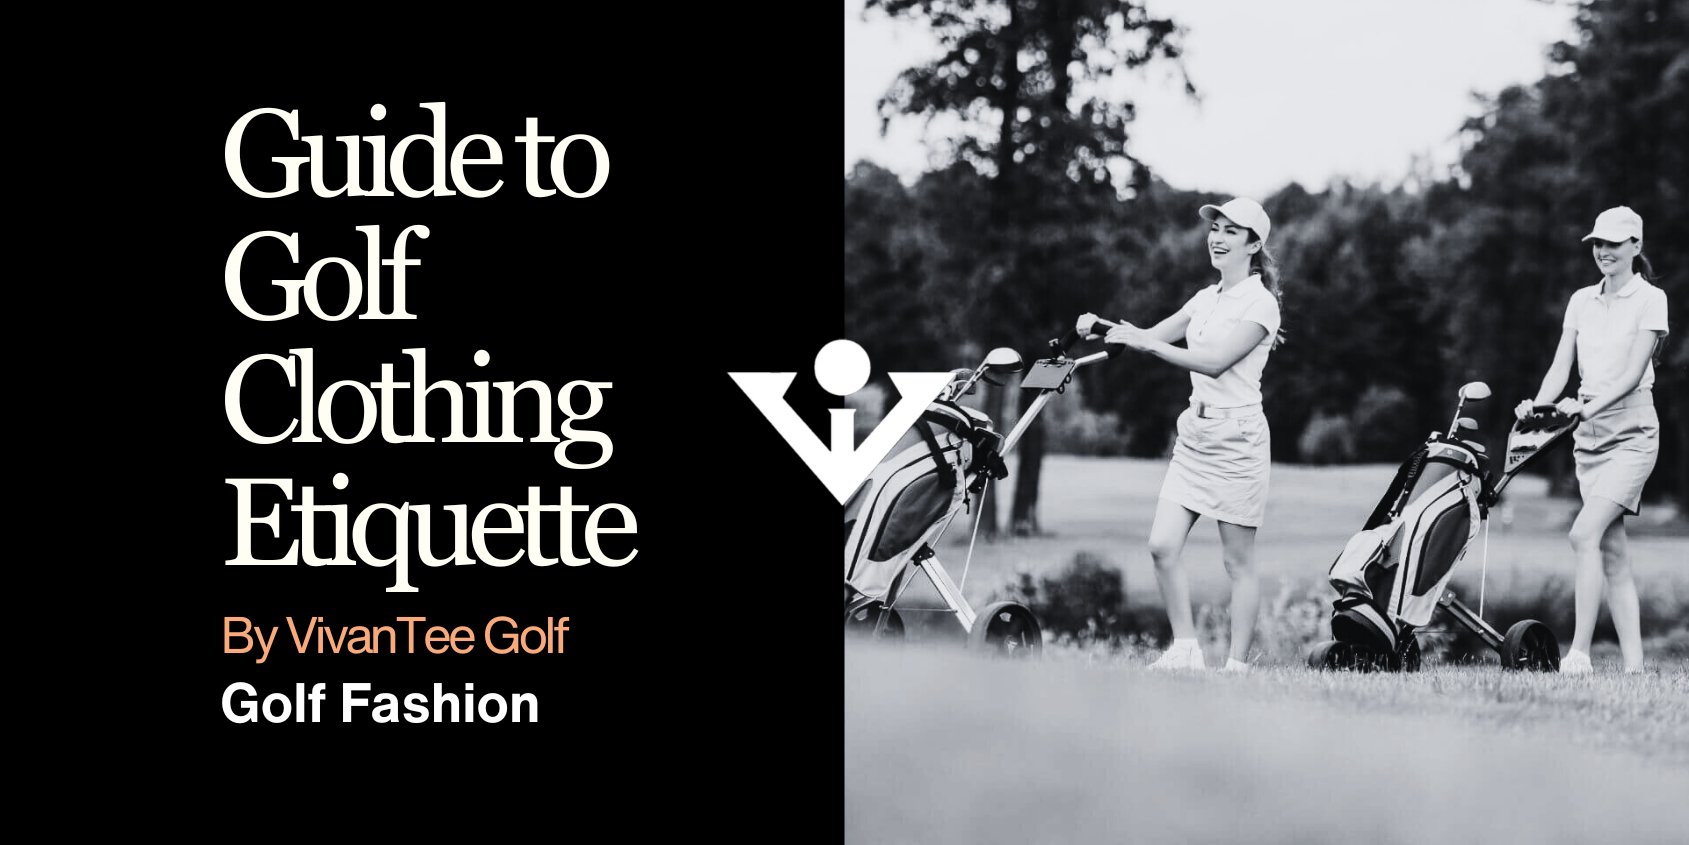 Women's Golf Attire Etiquette with an image of a couple women in fashionable golf clothing and push carts.